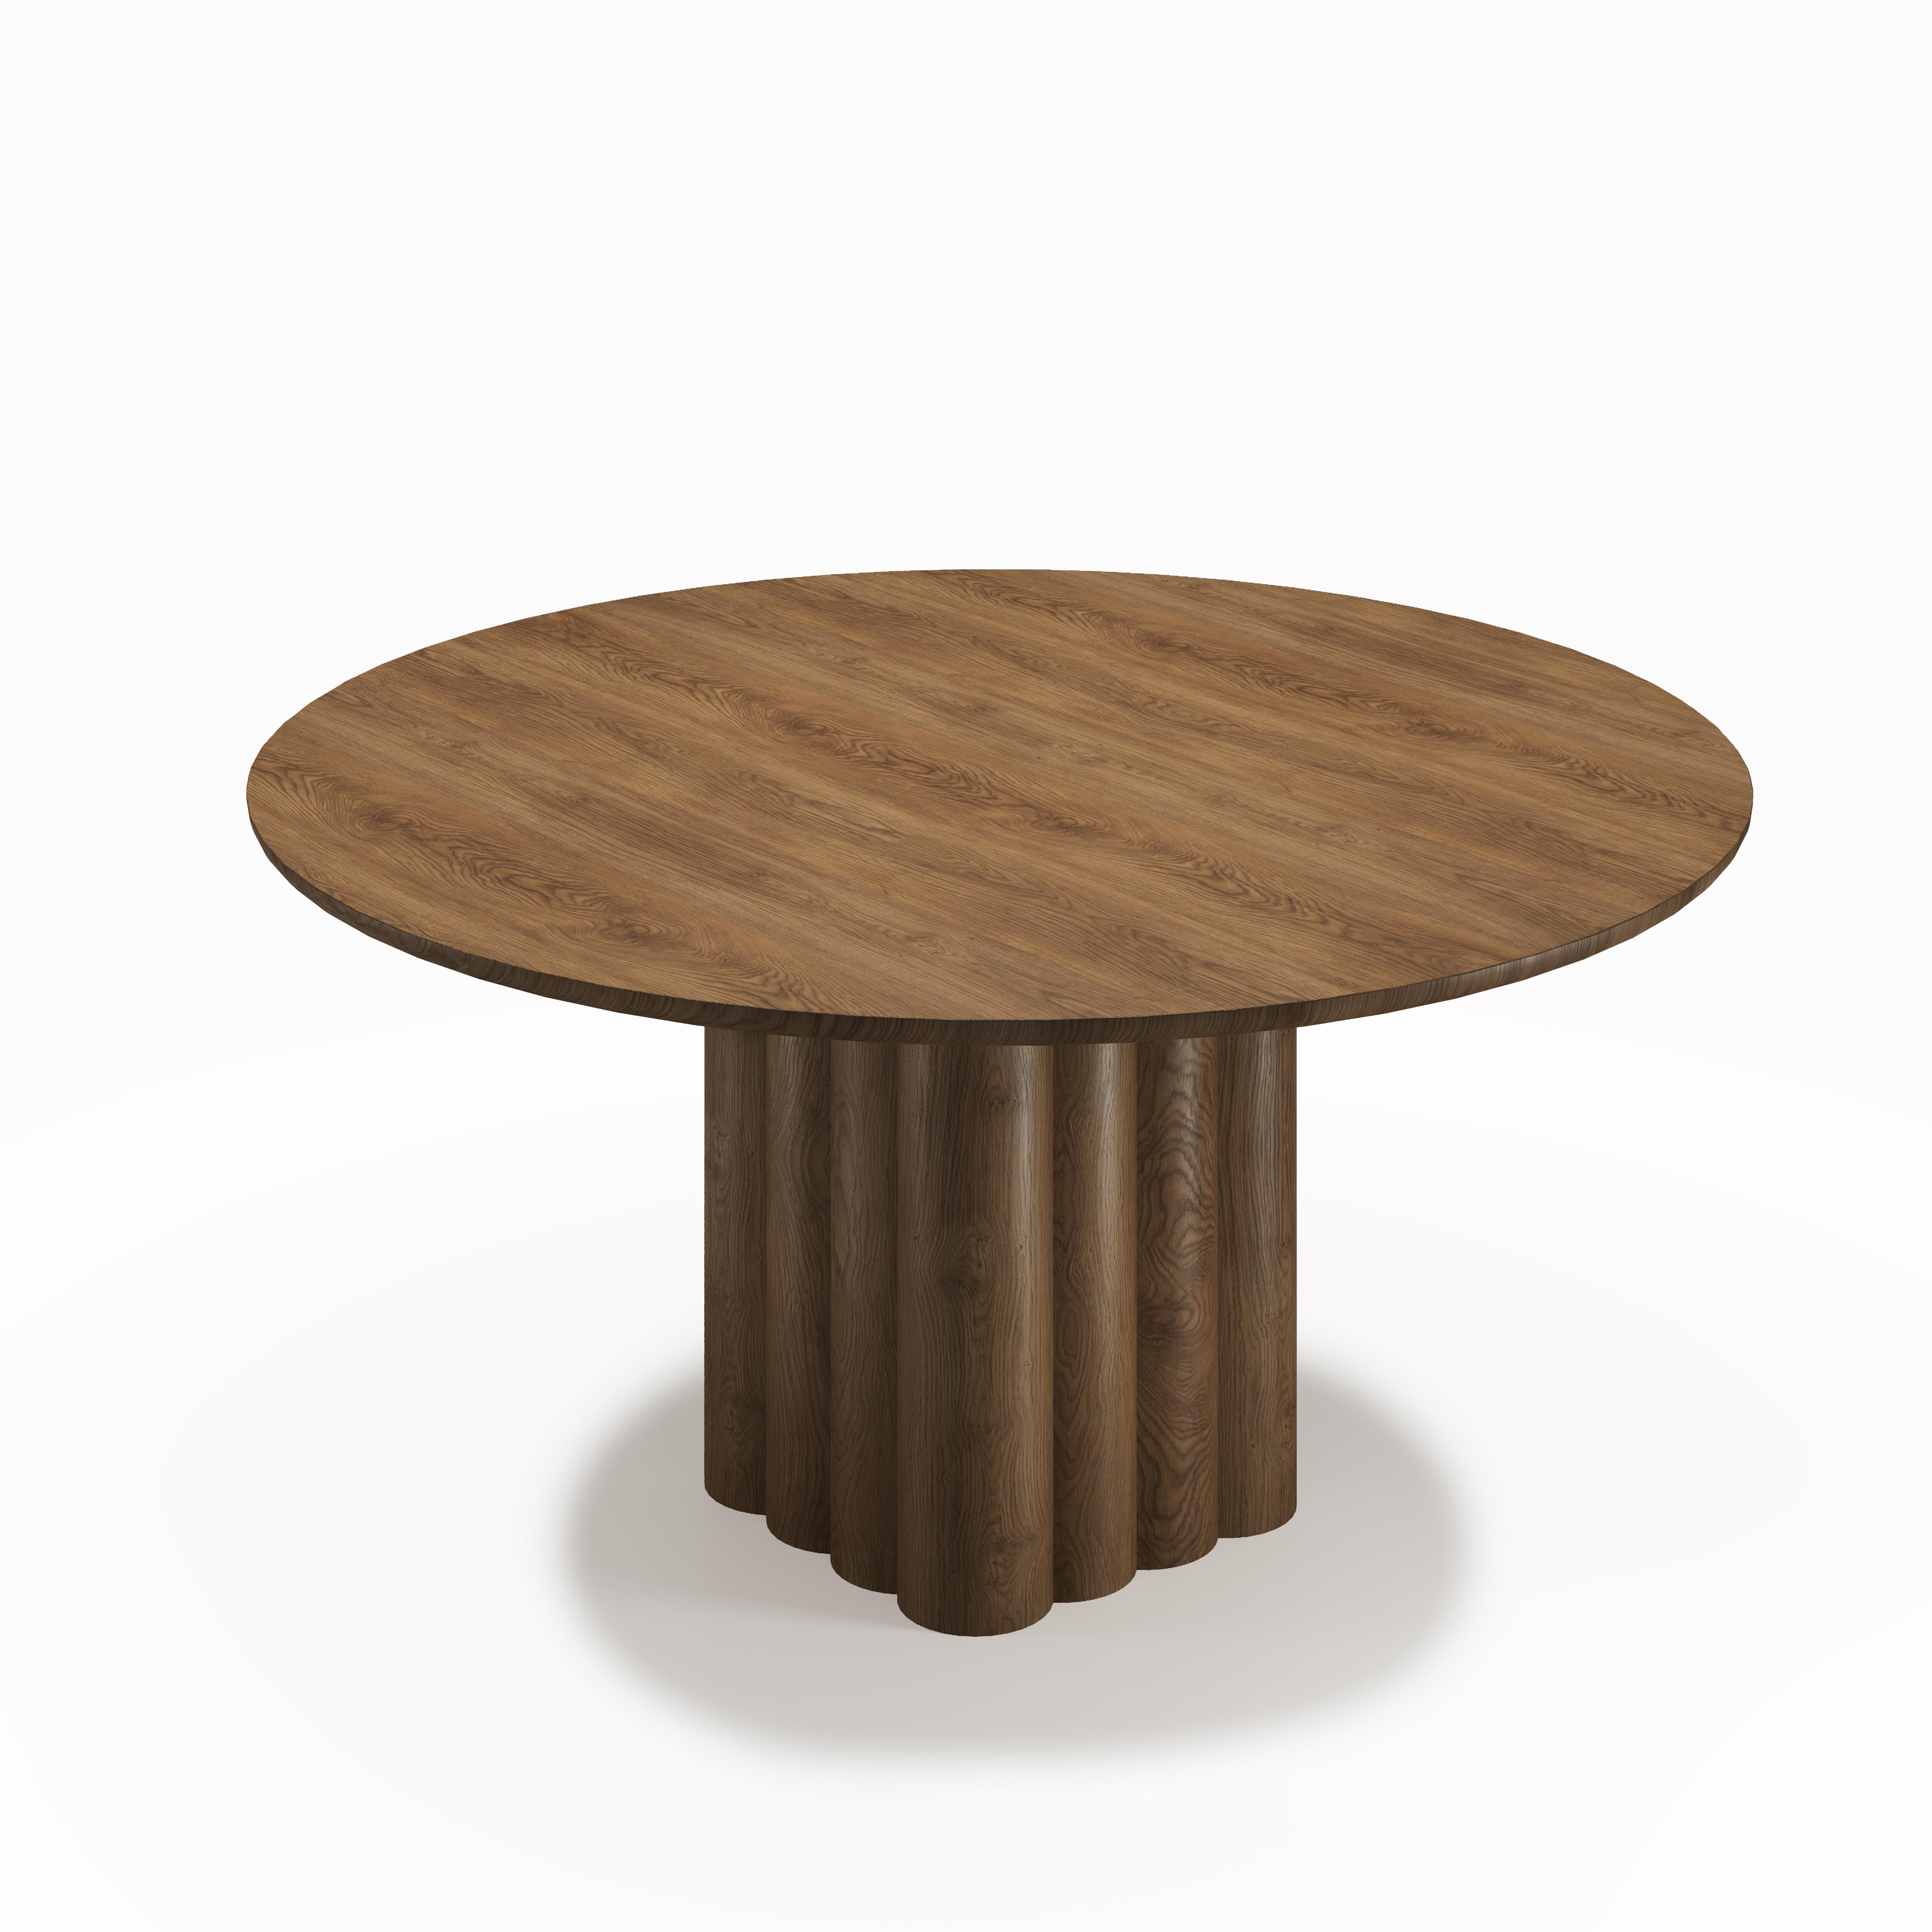 Round Dining Table 'Plush' by Dk3, Smoked Oak or Walnut, 150 cm For Sale 7